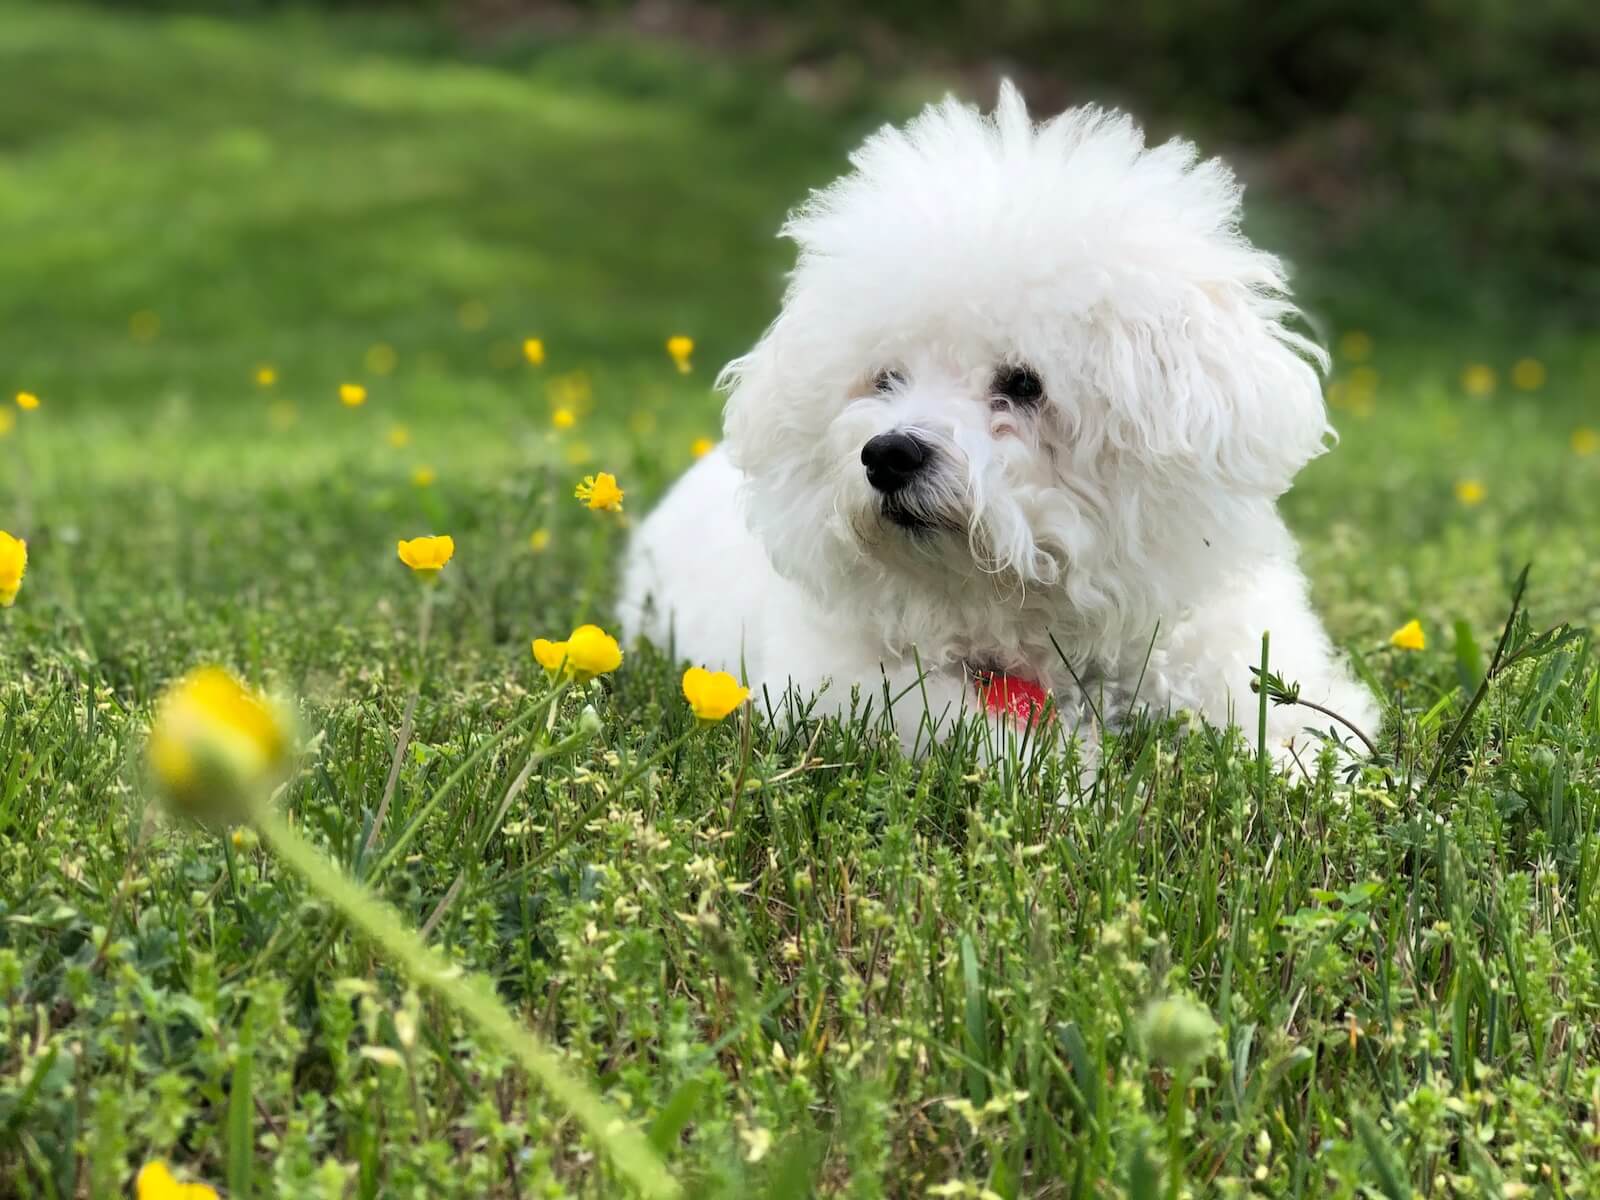 A Bichon Frise laying in the grass